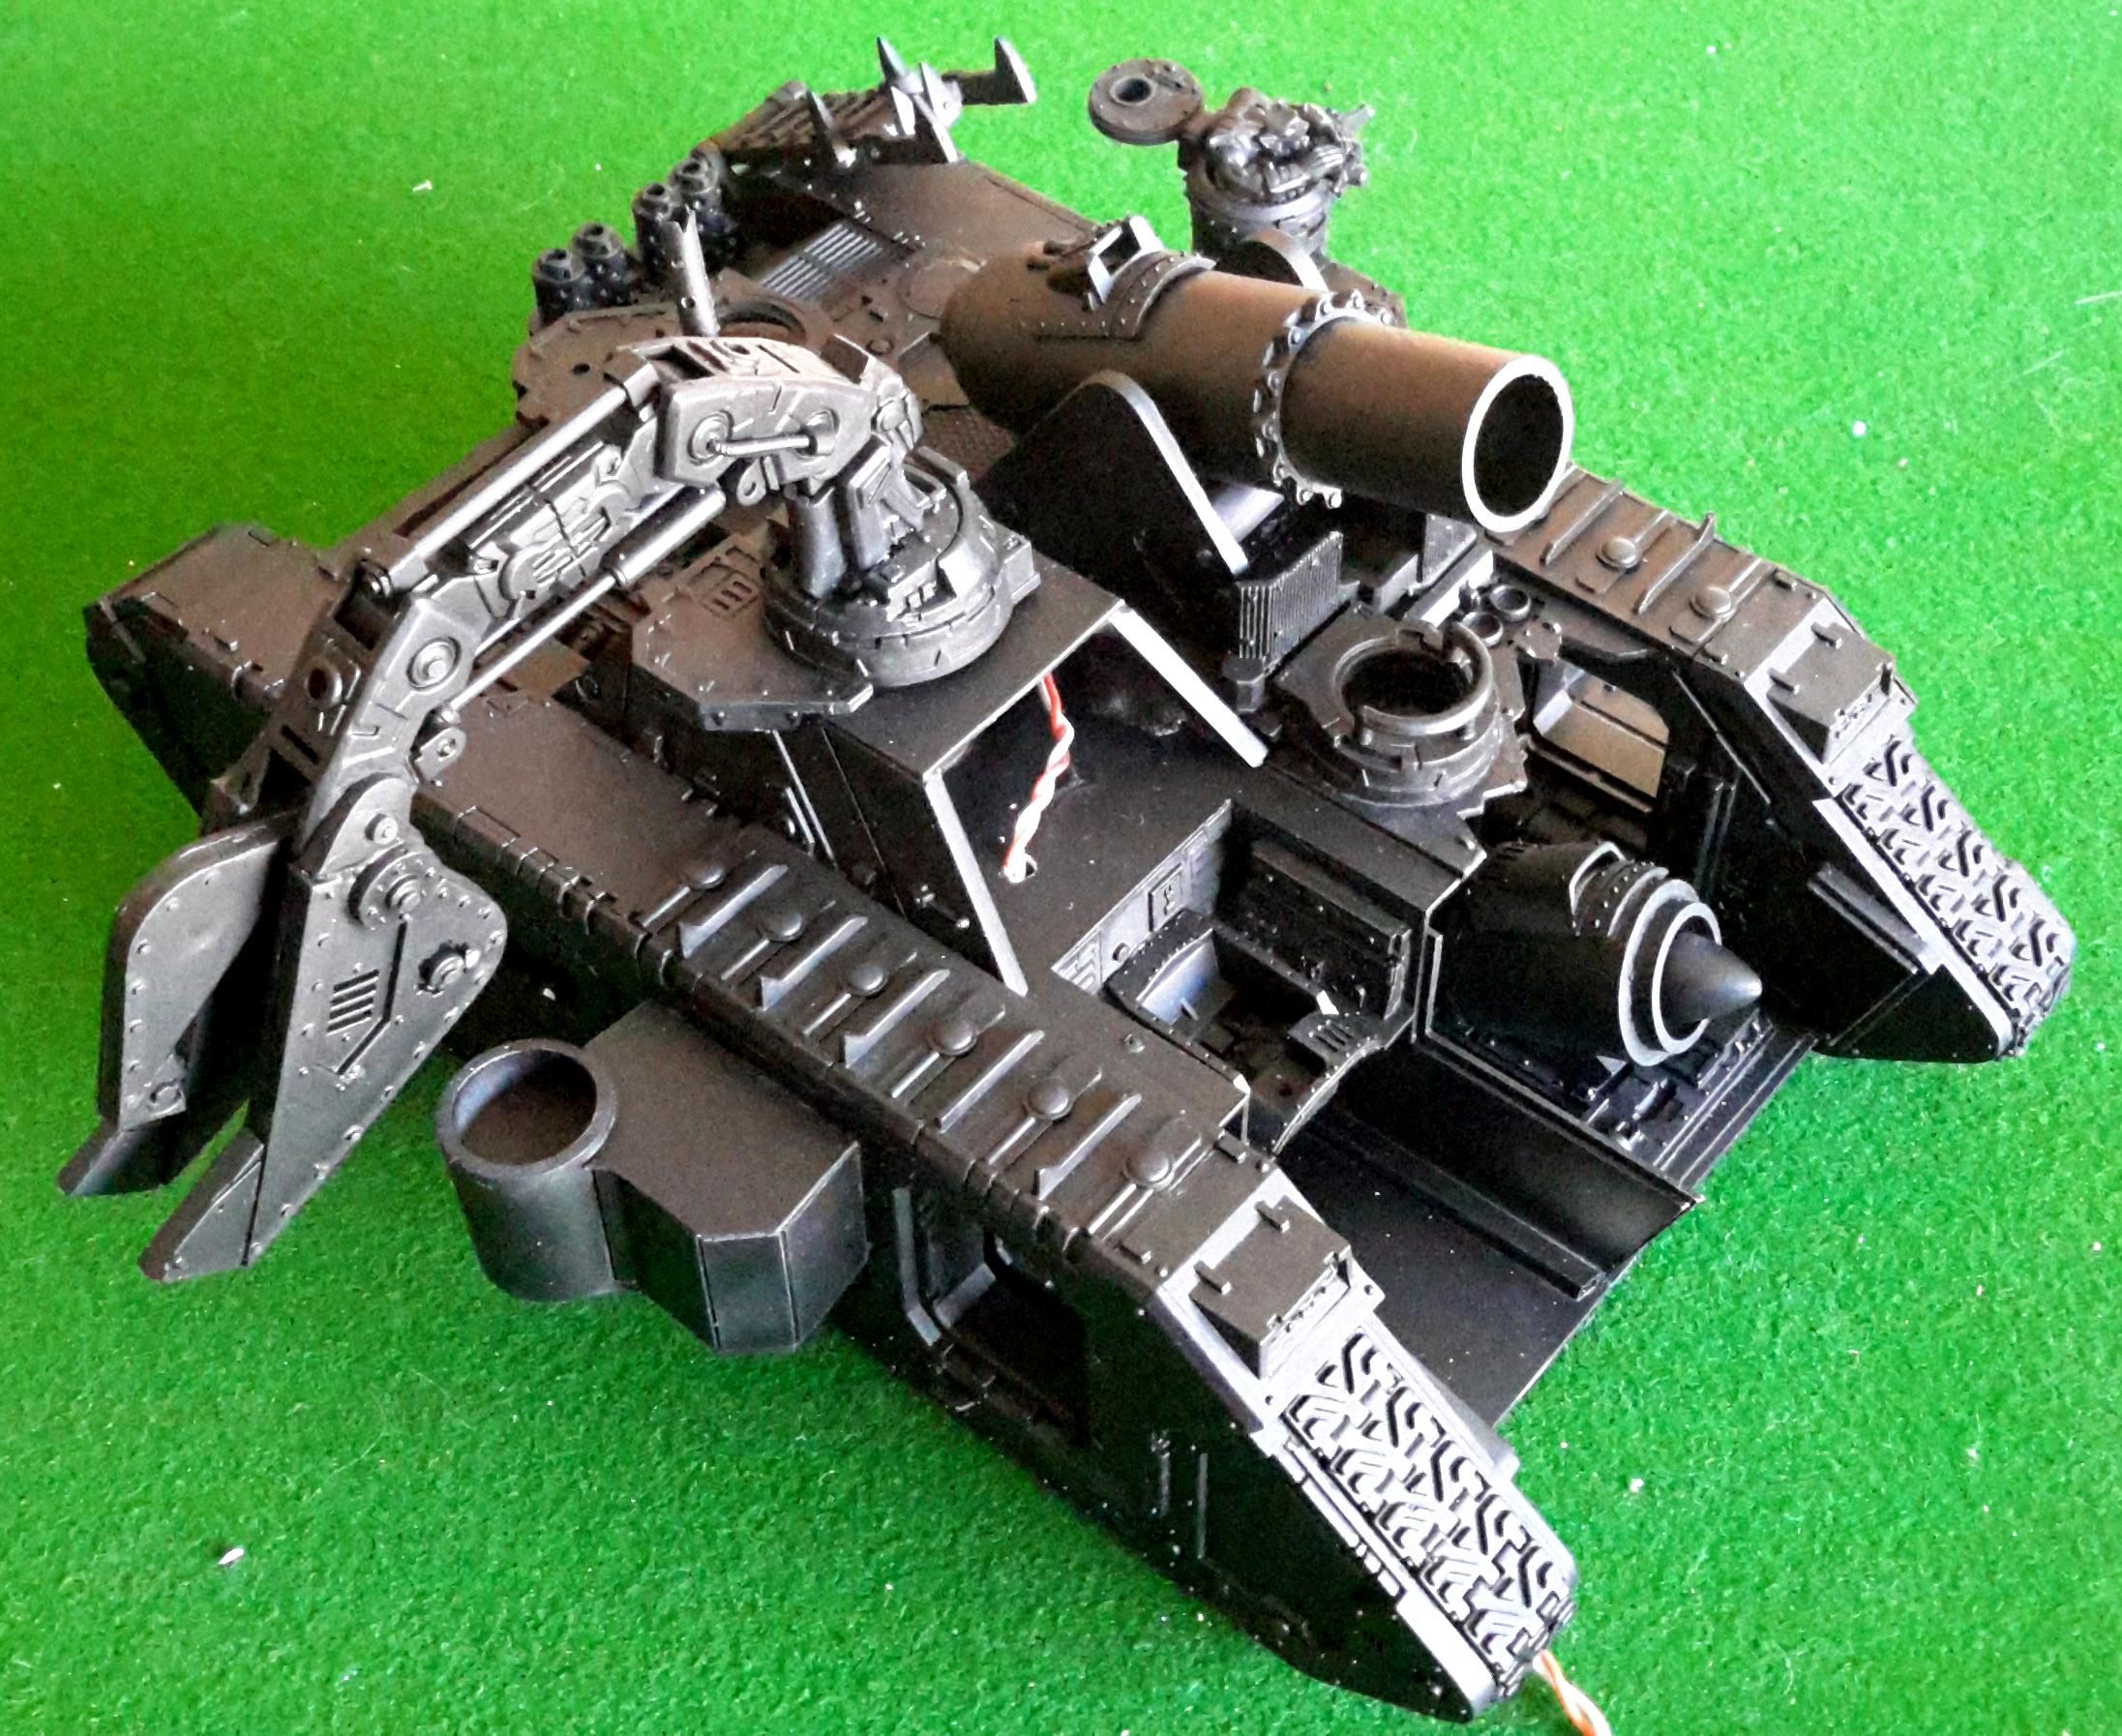 Battle Fortress, Battlewagon, Claw, Conversion, Fortress, Grappling Claw, Looted, Orks, Wagon